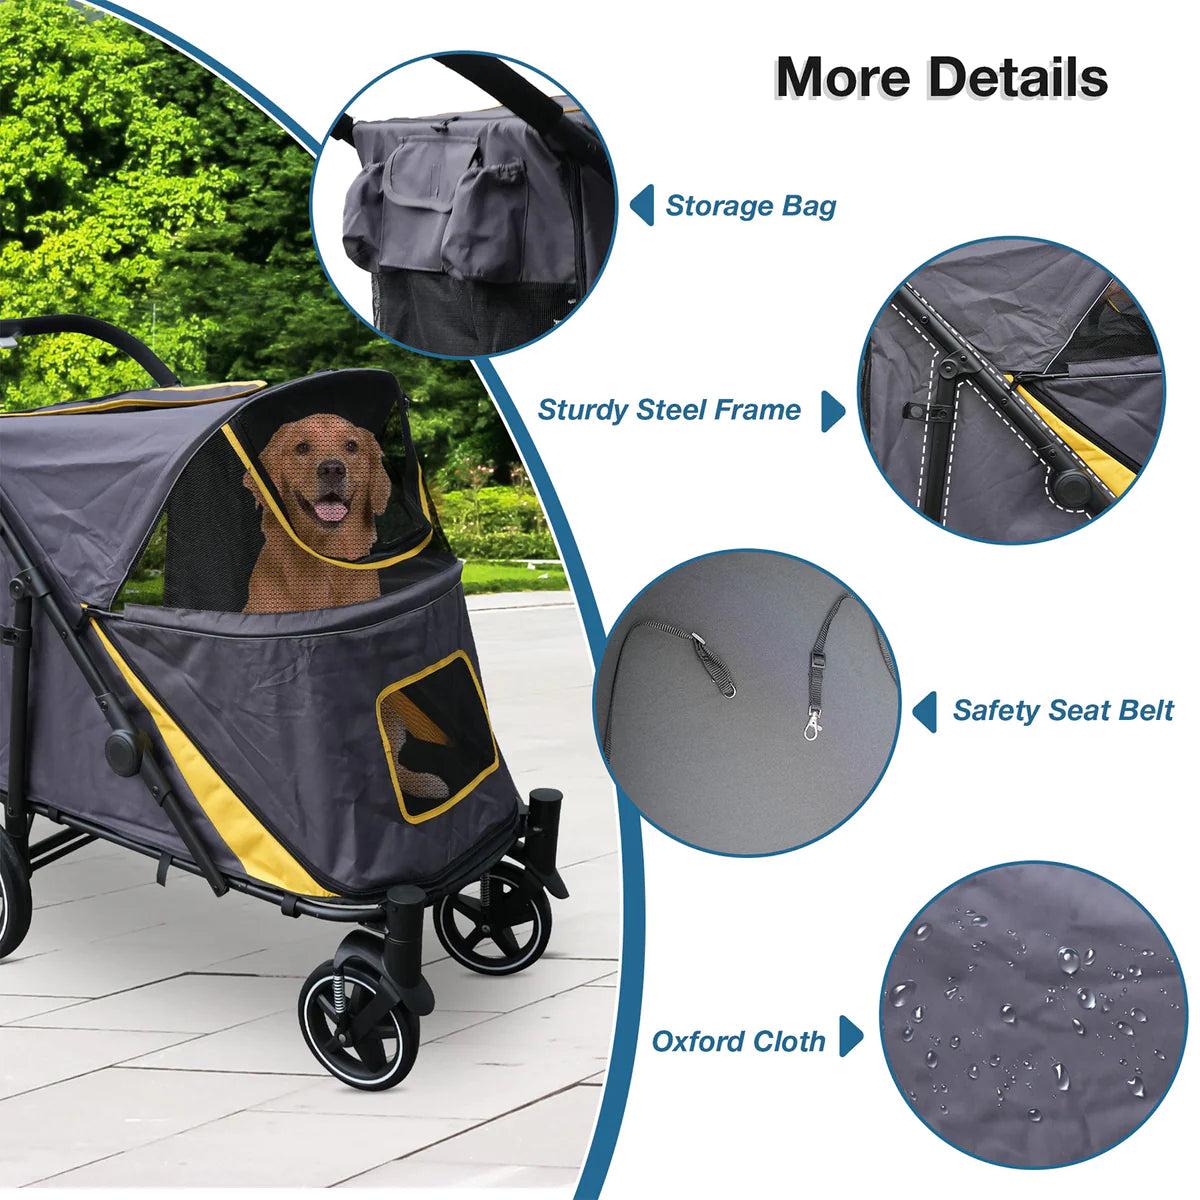 Foldable Pet Stroller Travel Carrier with Storage Pocket, Breathable Mesh, Gray and Yellow | karmasfar.us